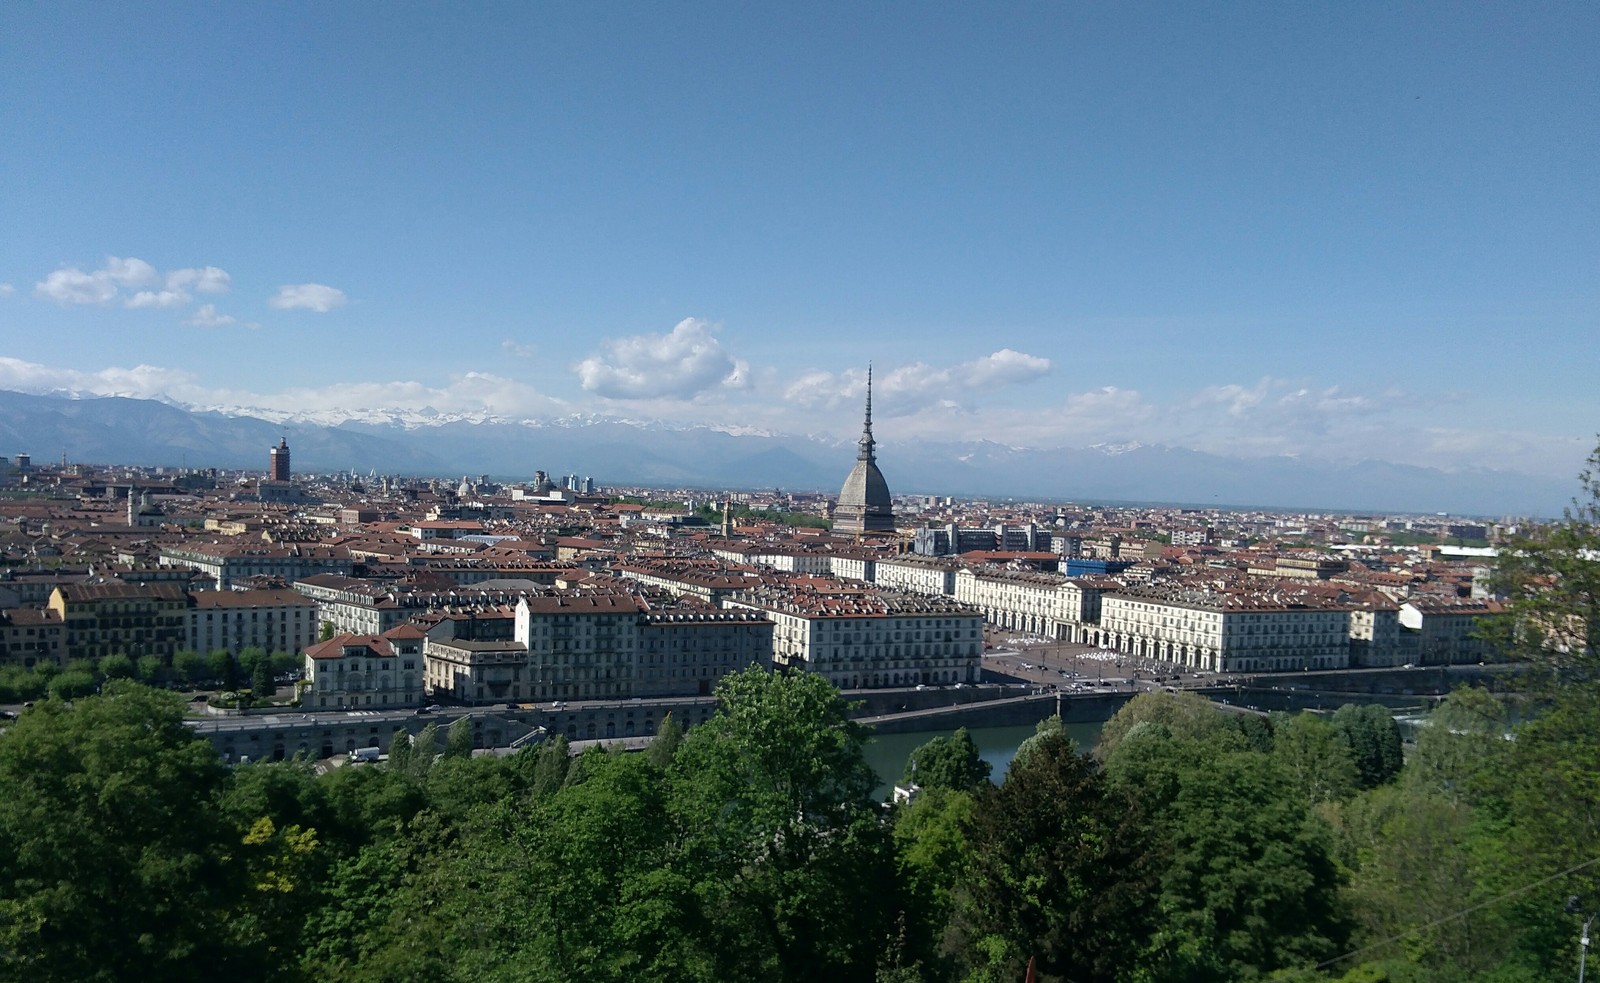 Just today's Turin - My, , Turin, Italy, My